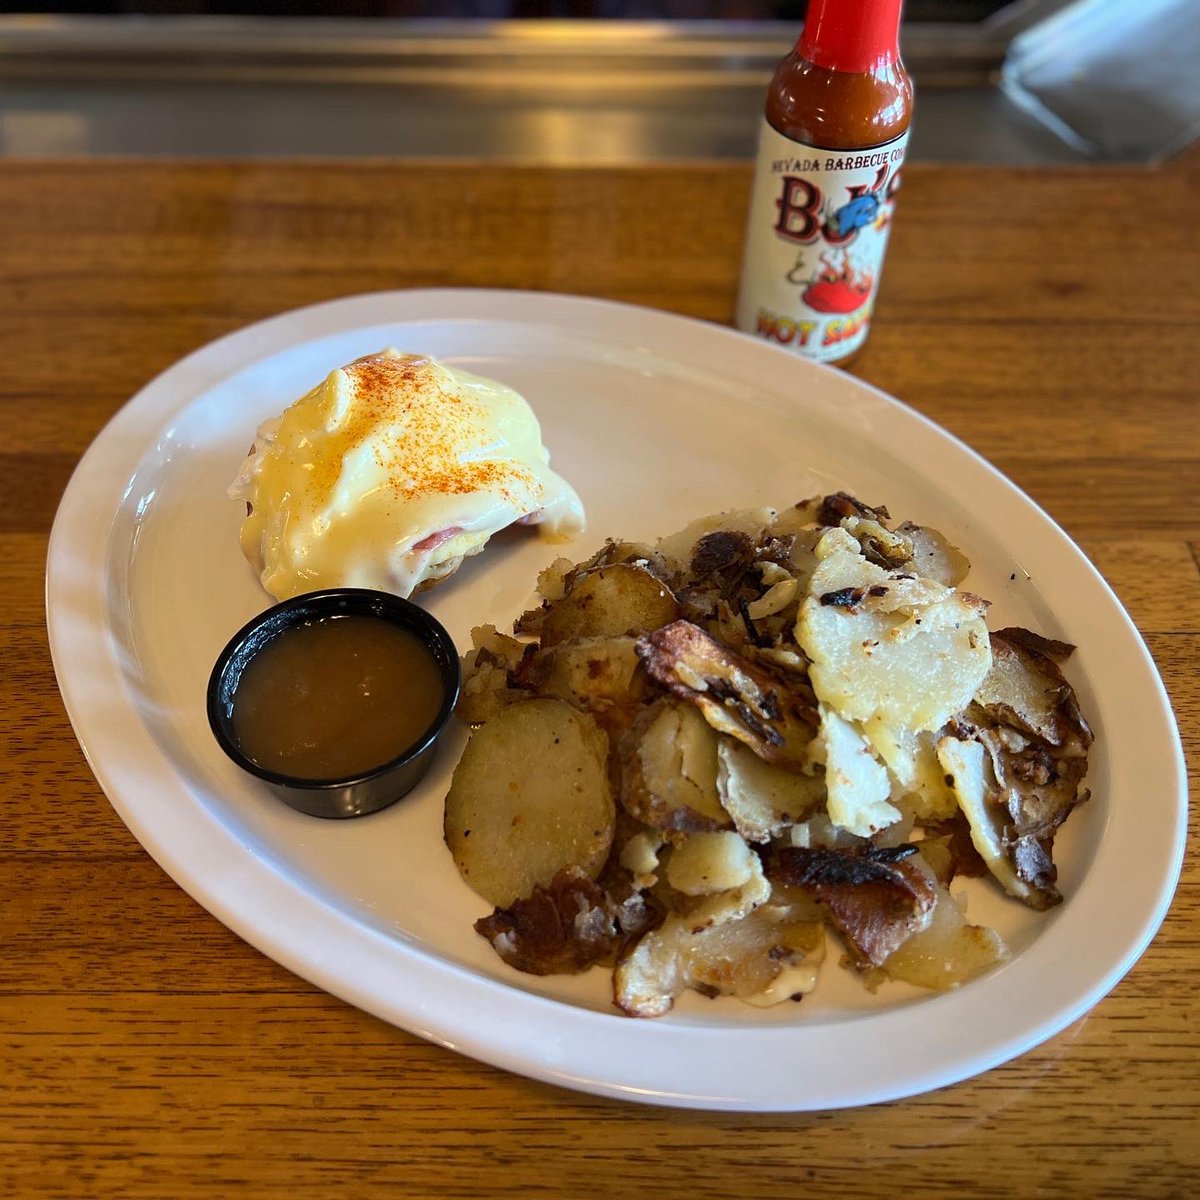 #GoodMorning! We’re back in action today serving the best #breakfast in Northern Nevada. Come in and order yours by noon. 

See you soon! 

.
.
.

#Wednesday #BJsNVBBQ #Delicious #Food #SparksProud #FamilyOwned #SparksNV #SparksNevada #NorthernNevada #HomeMeansNevada